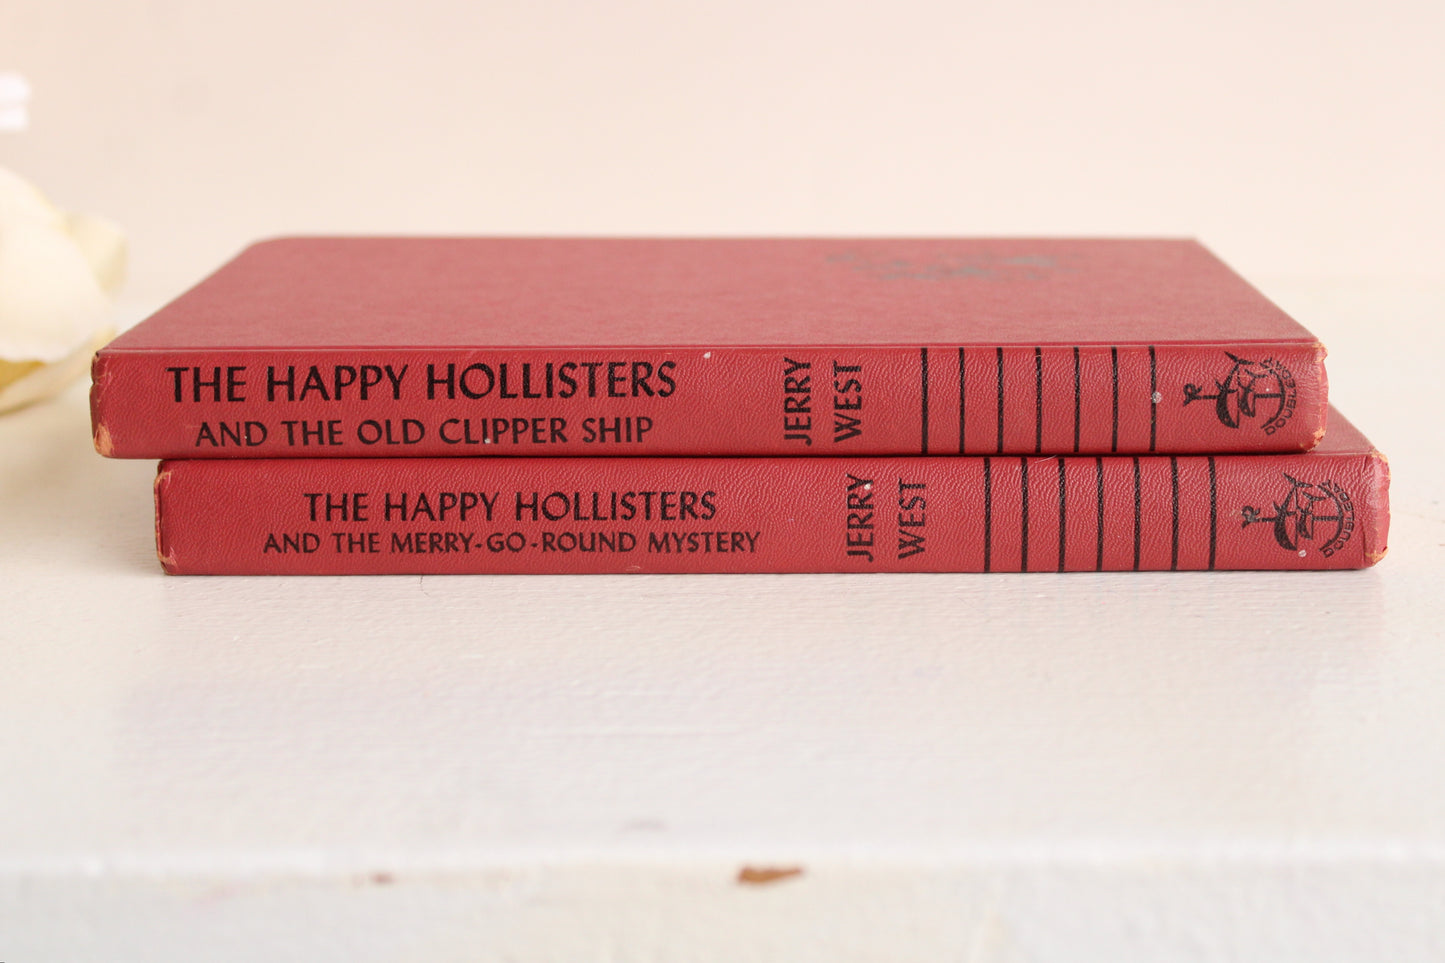 Vintage 1950s Books, "The Happy Hollisters" by Jerry West